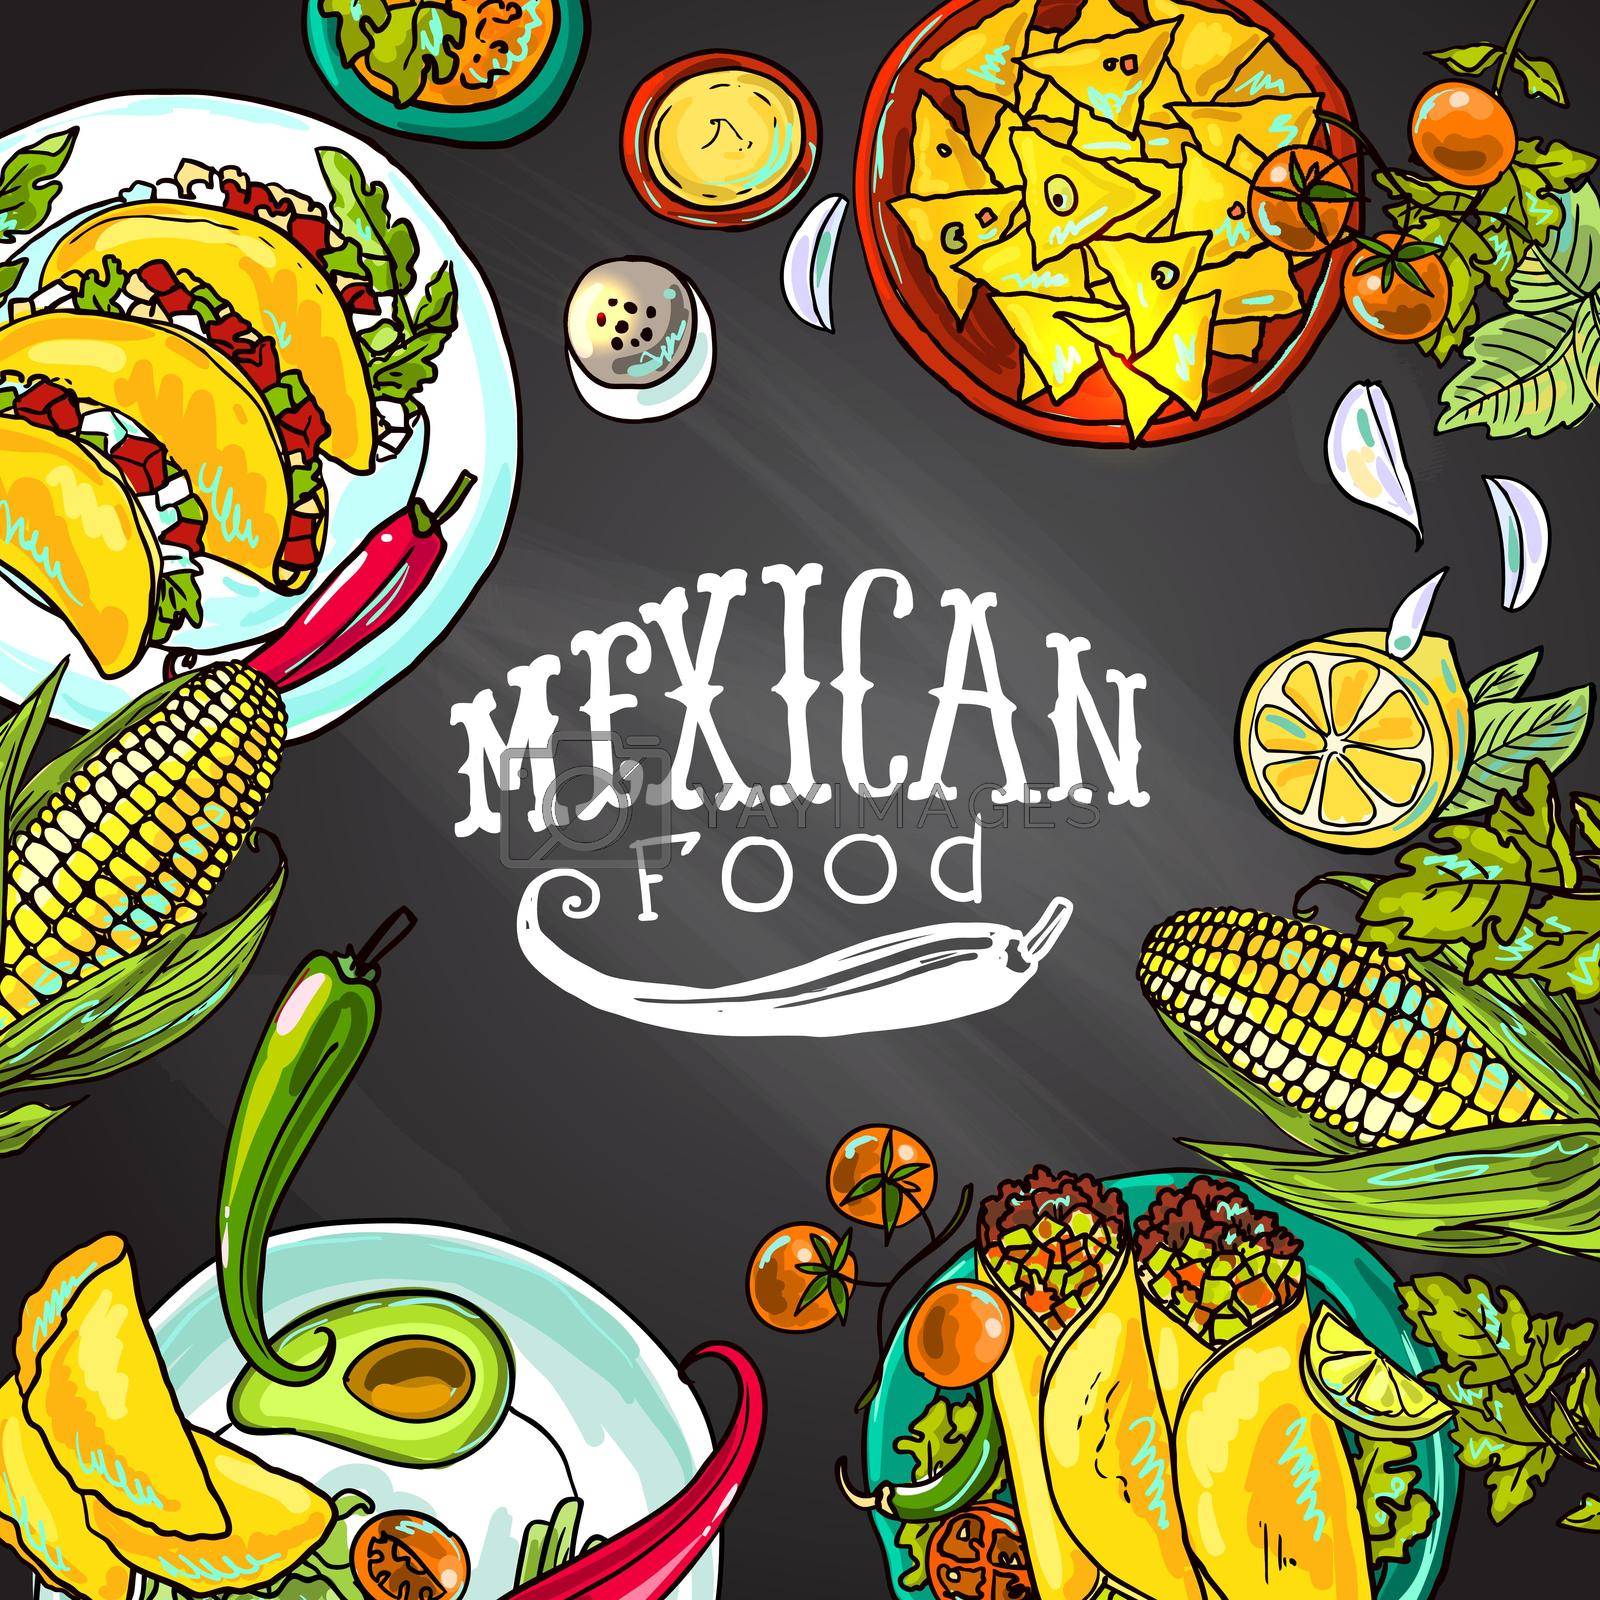 Royalty free image of mexican food- illustration on the chalkboard by steshnikova